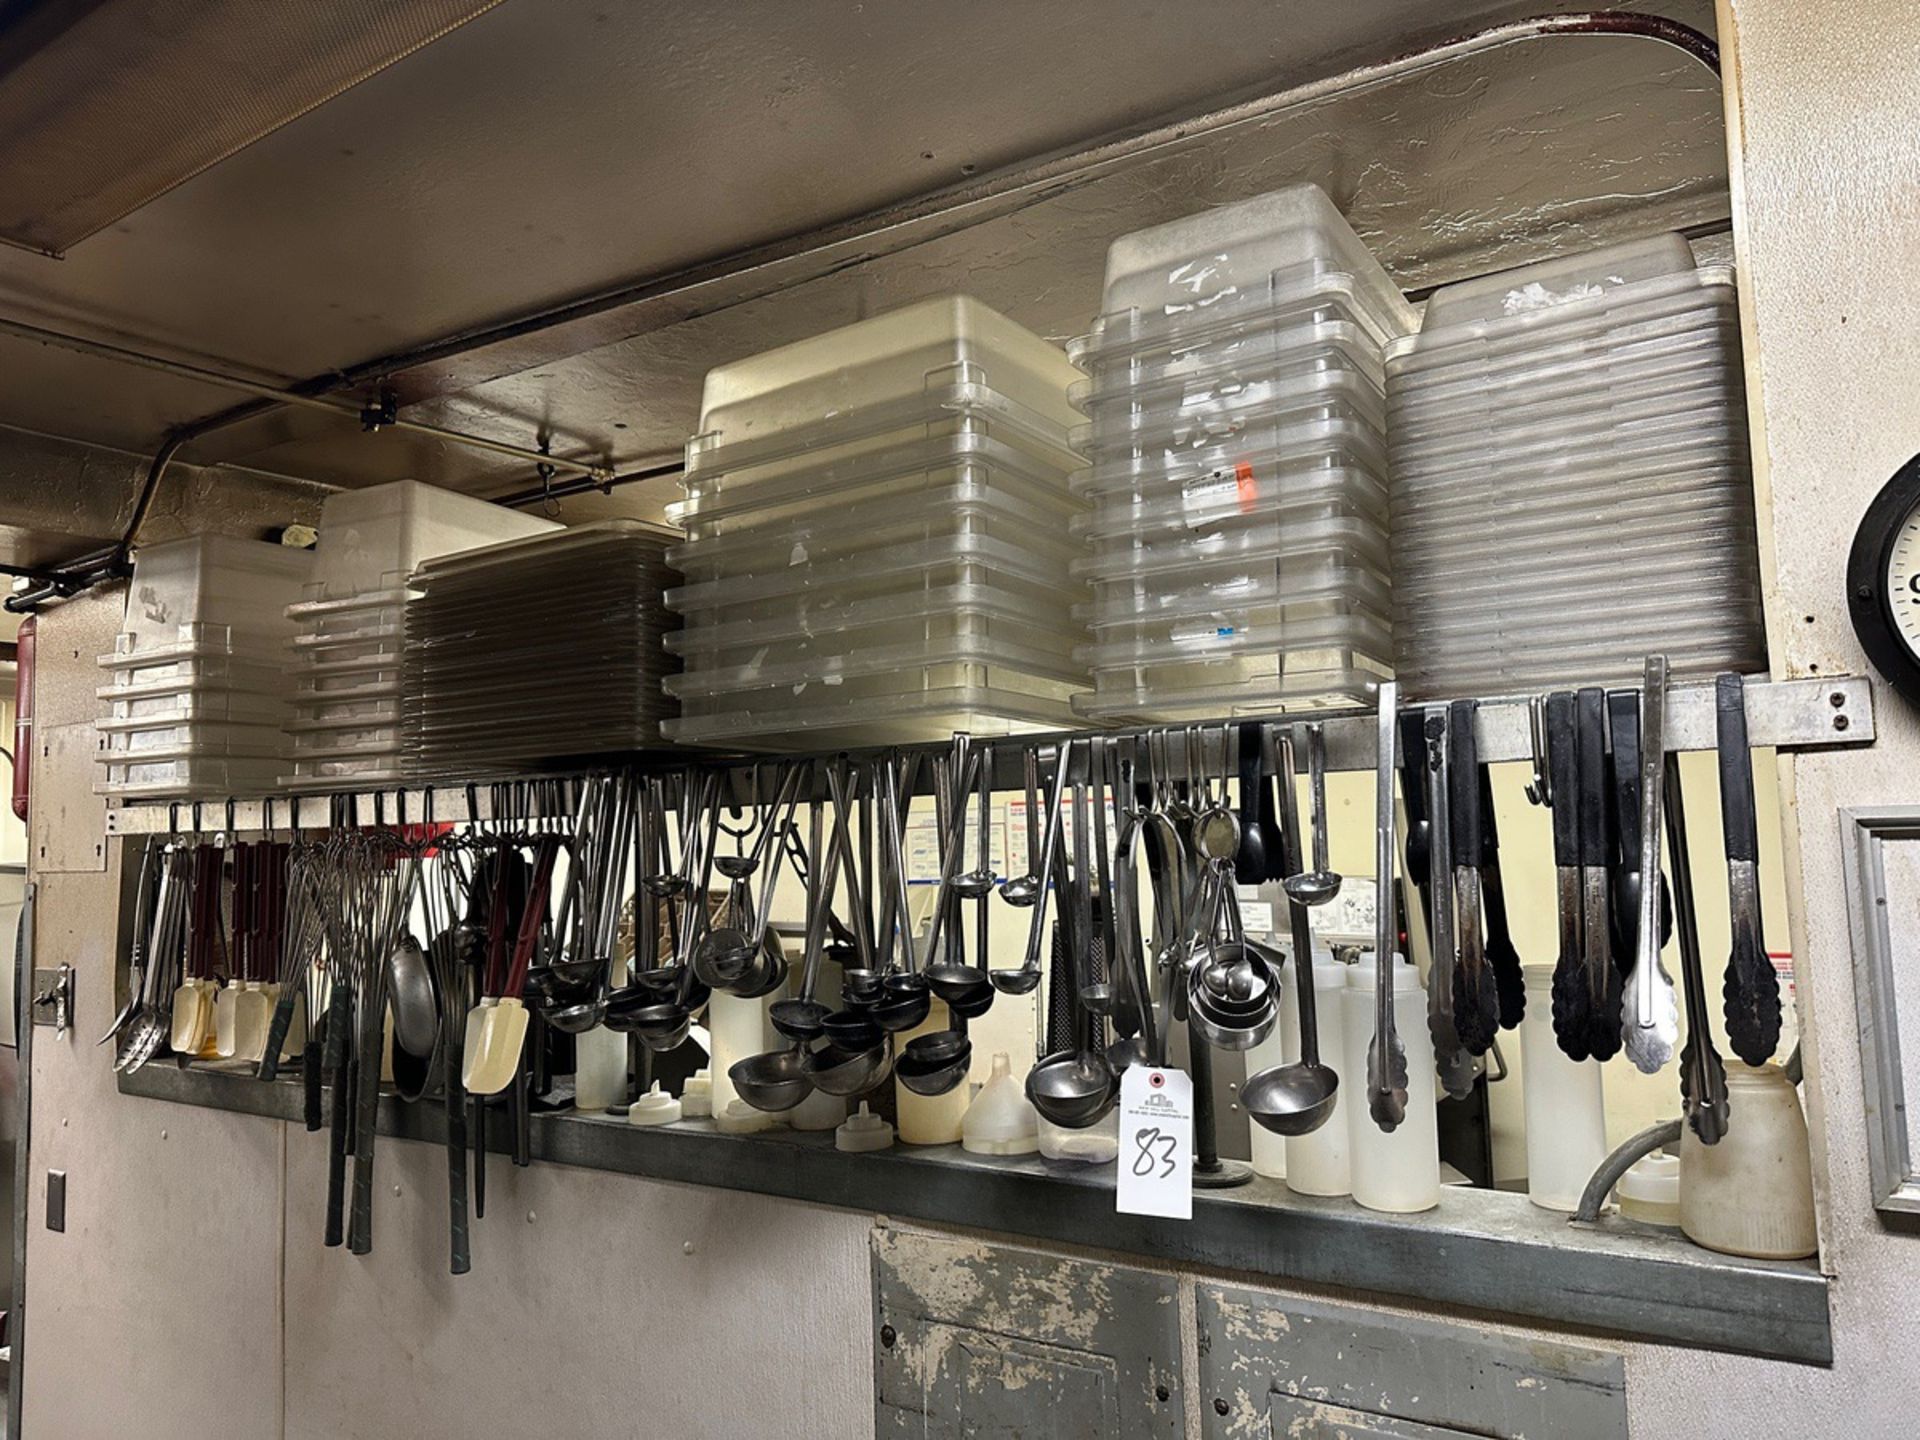 Lot of Utensils and Large Cambros, Lexons and Pans - Subj to Bulk | Rig Fee $75